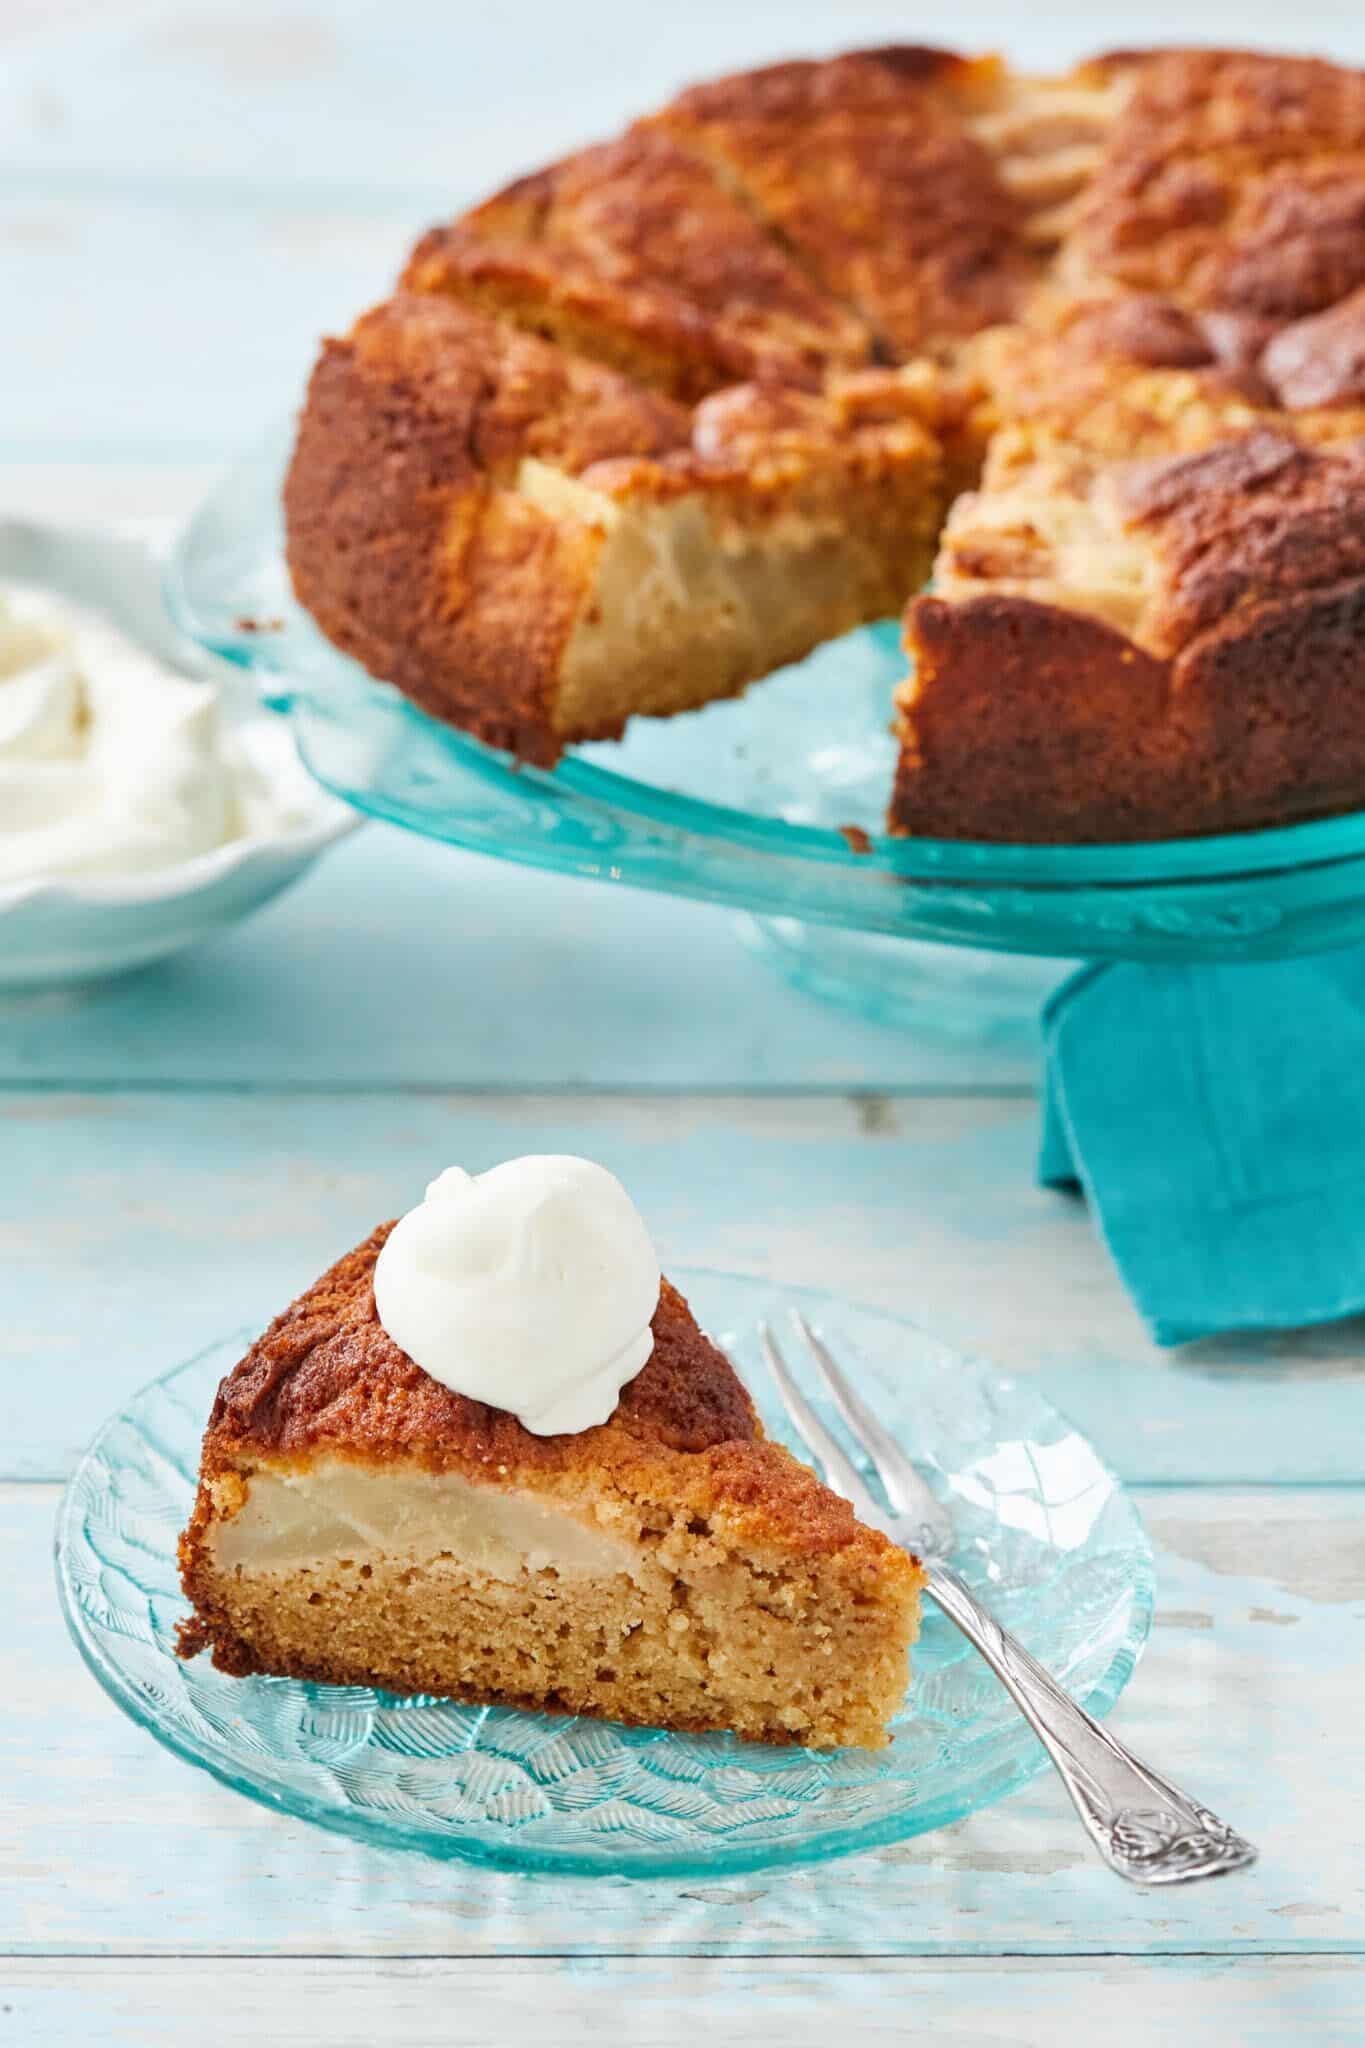 The gorgeous Warm Pear and Honey Cake is served on a big glass cake stand with one slice on a small dessert plate. The moist cake has a beautiful golden brown color, loaded with soft and juicy pears, topped with a big scoop of vanilla ice cream. 